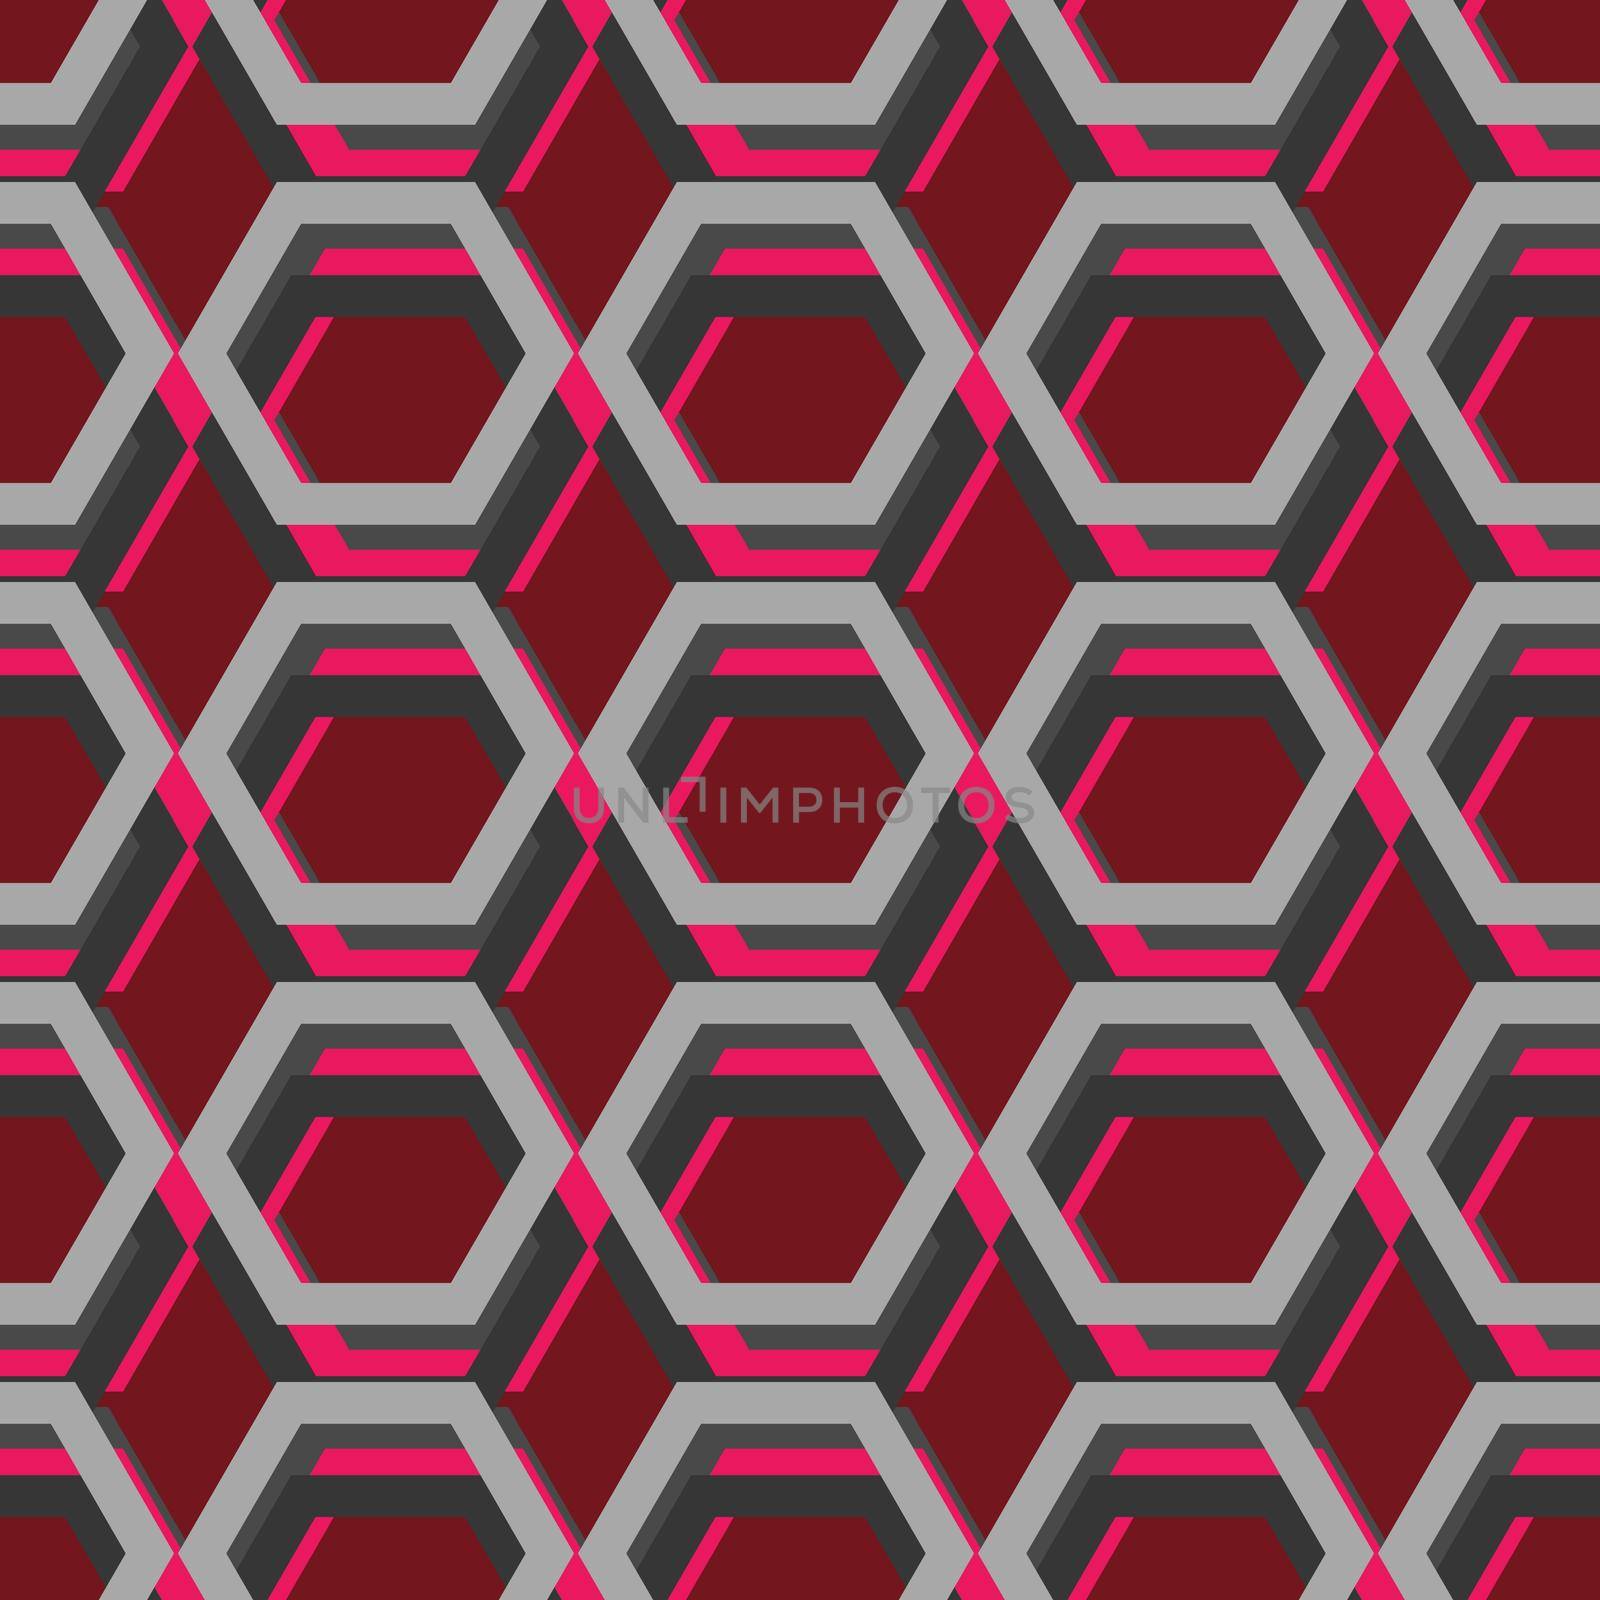 Seamless pattern background with hexagons. Vector illustration.